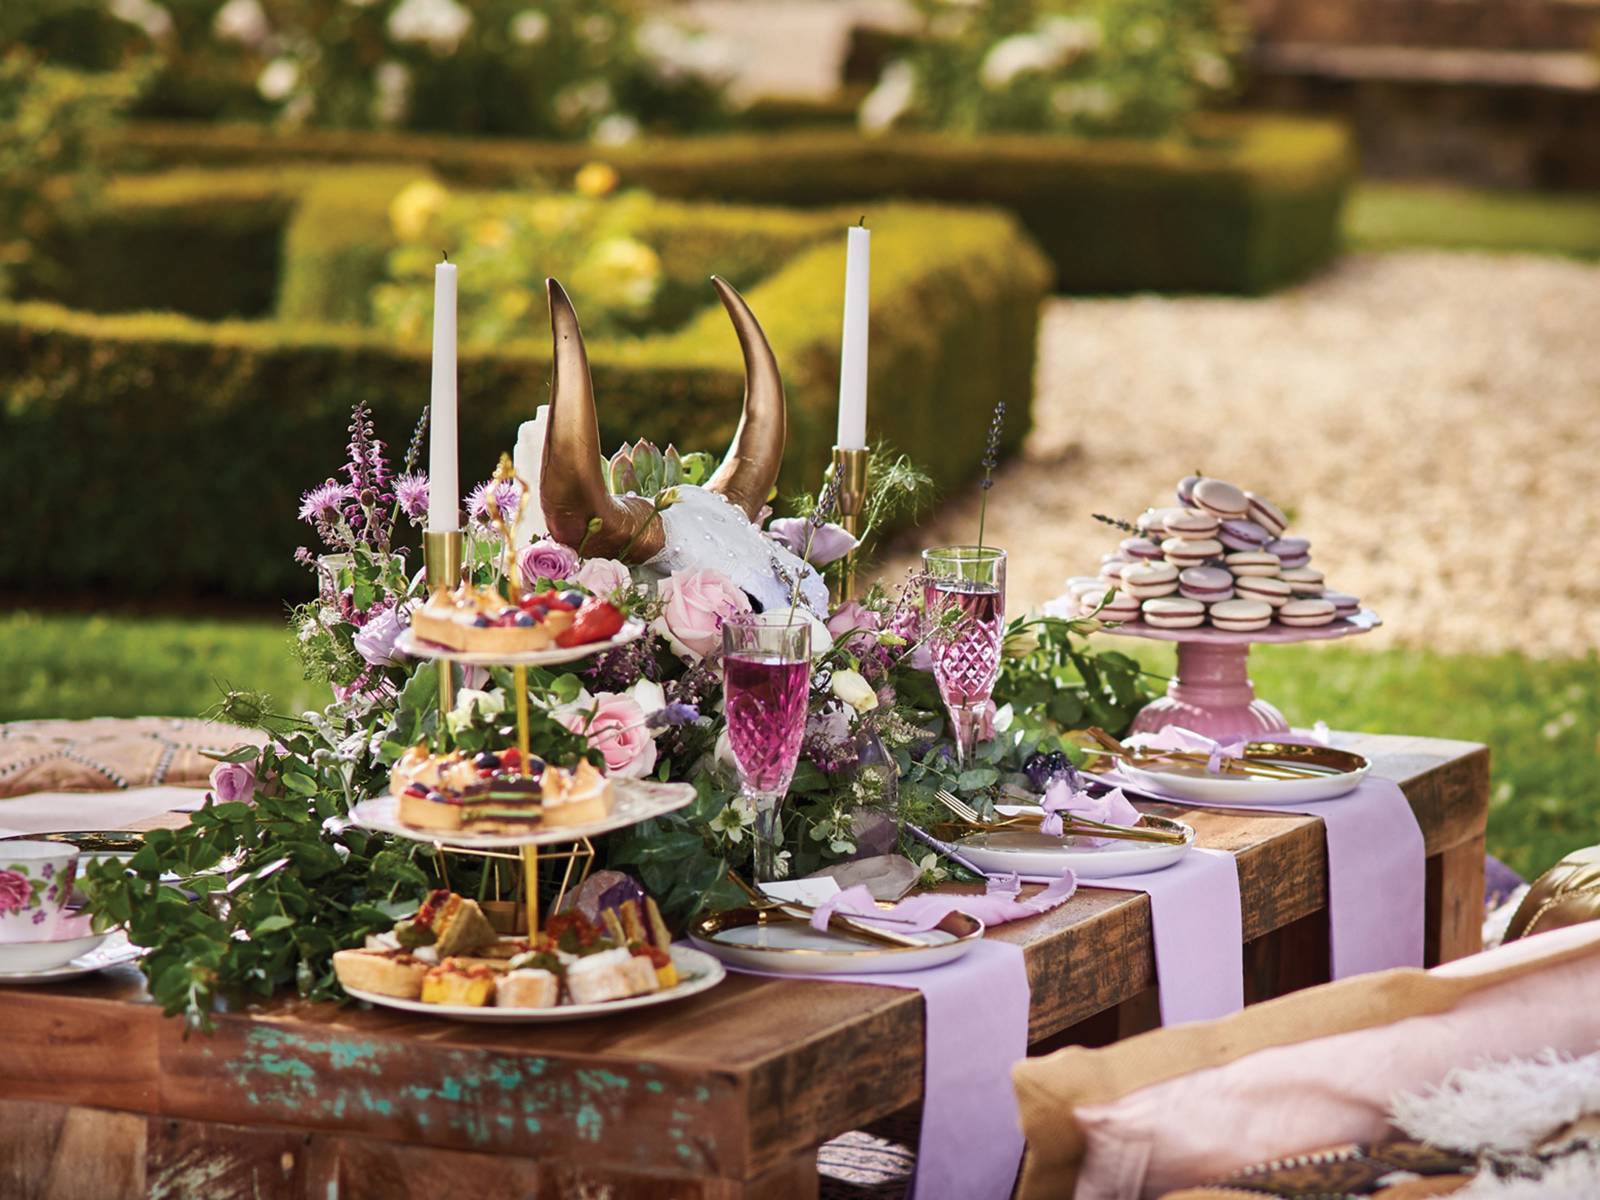 Rustic wood table with pink and lavender florals, dessert tower, china and crystal